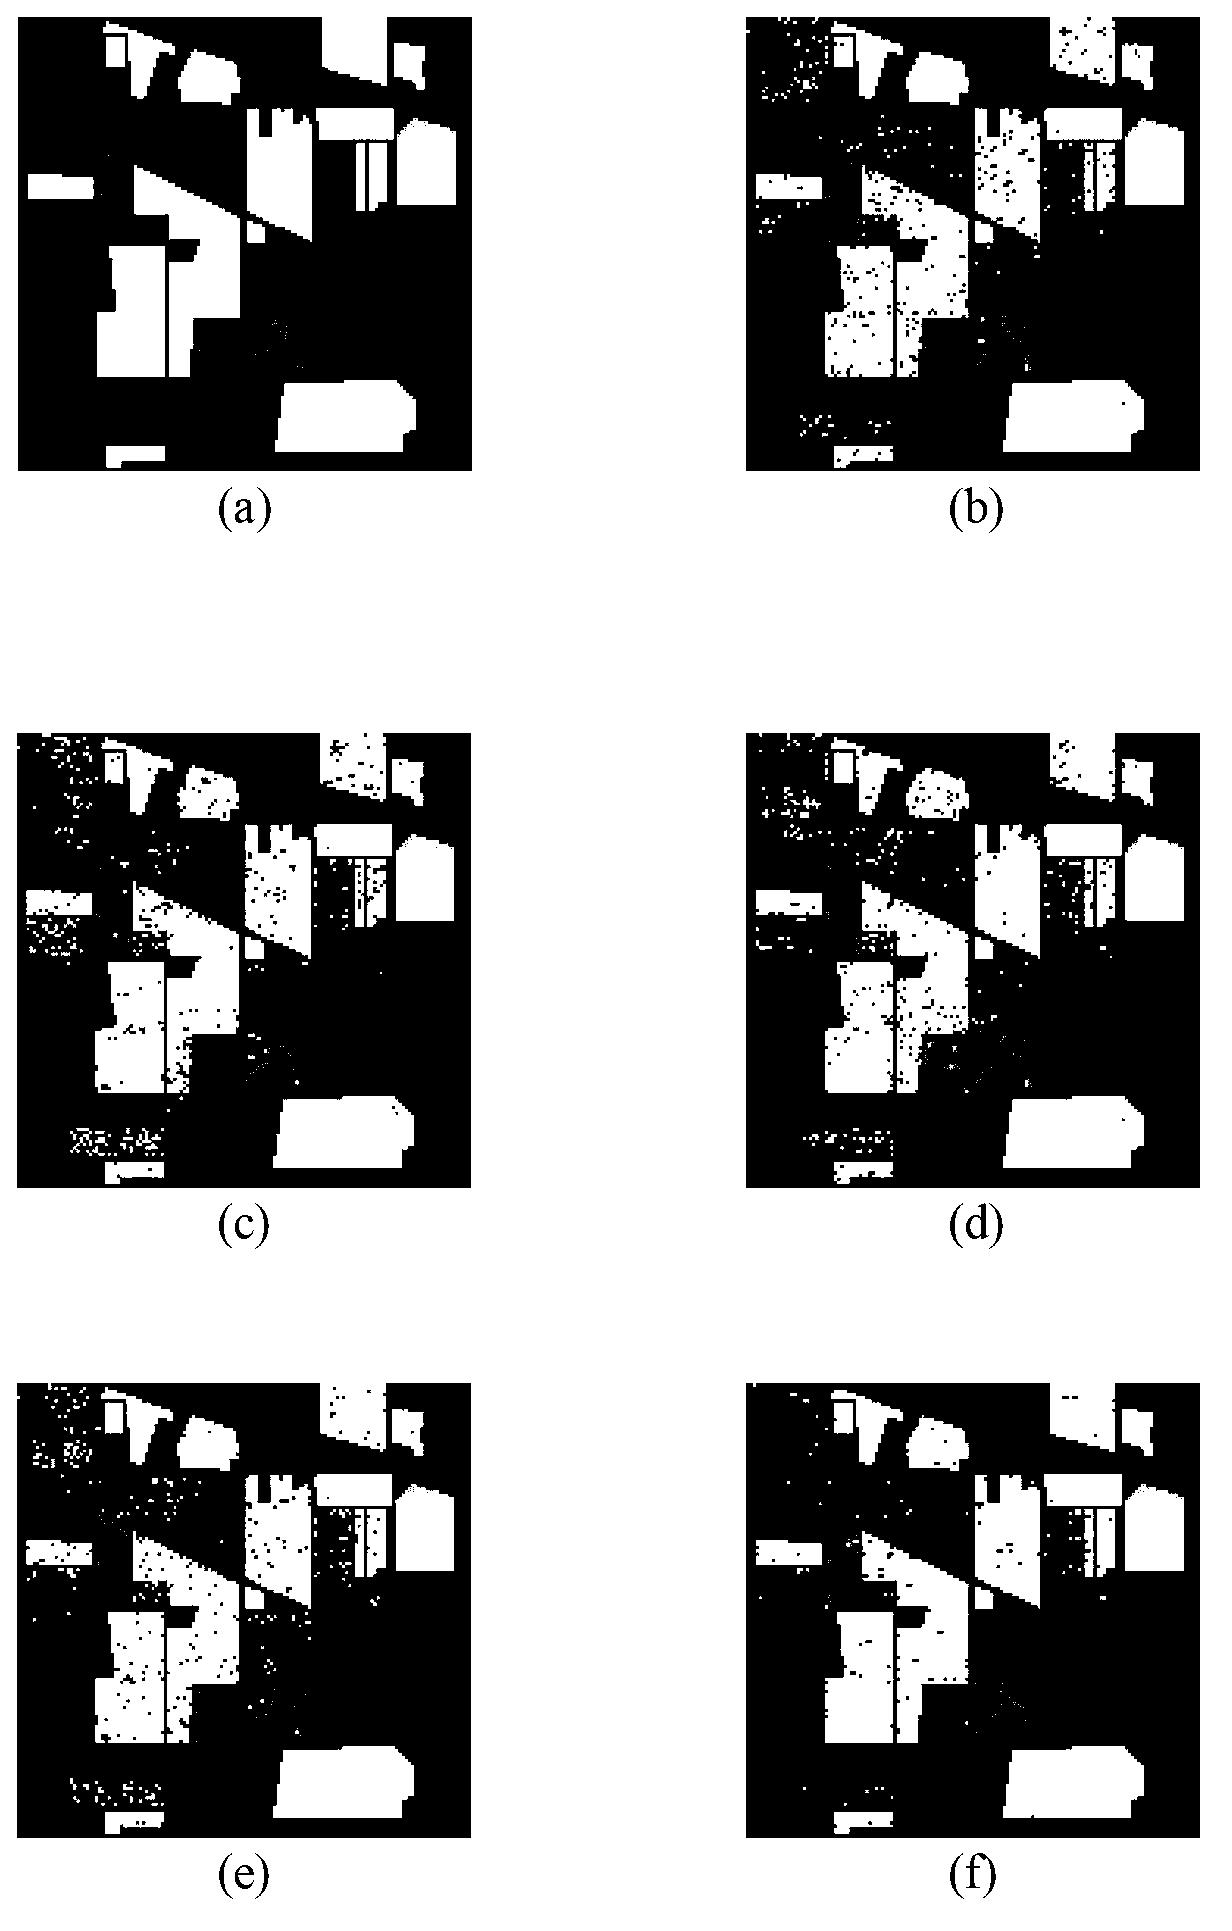 Hyperspectral image classification method based on local cooperative expression and neighbourhood information constraint